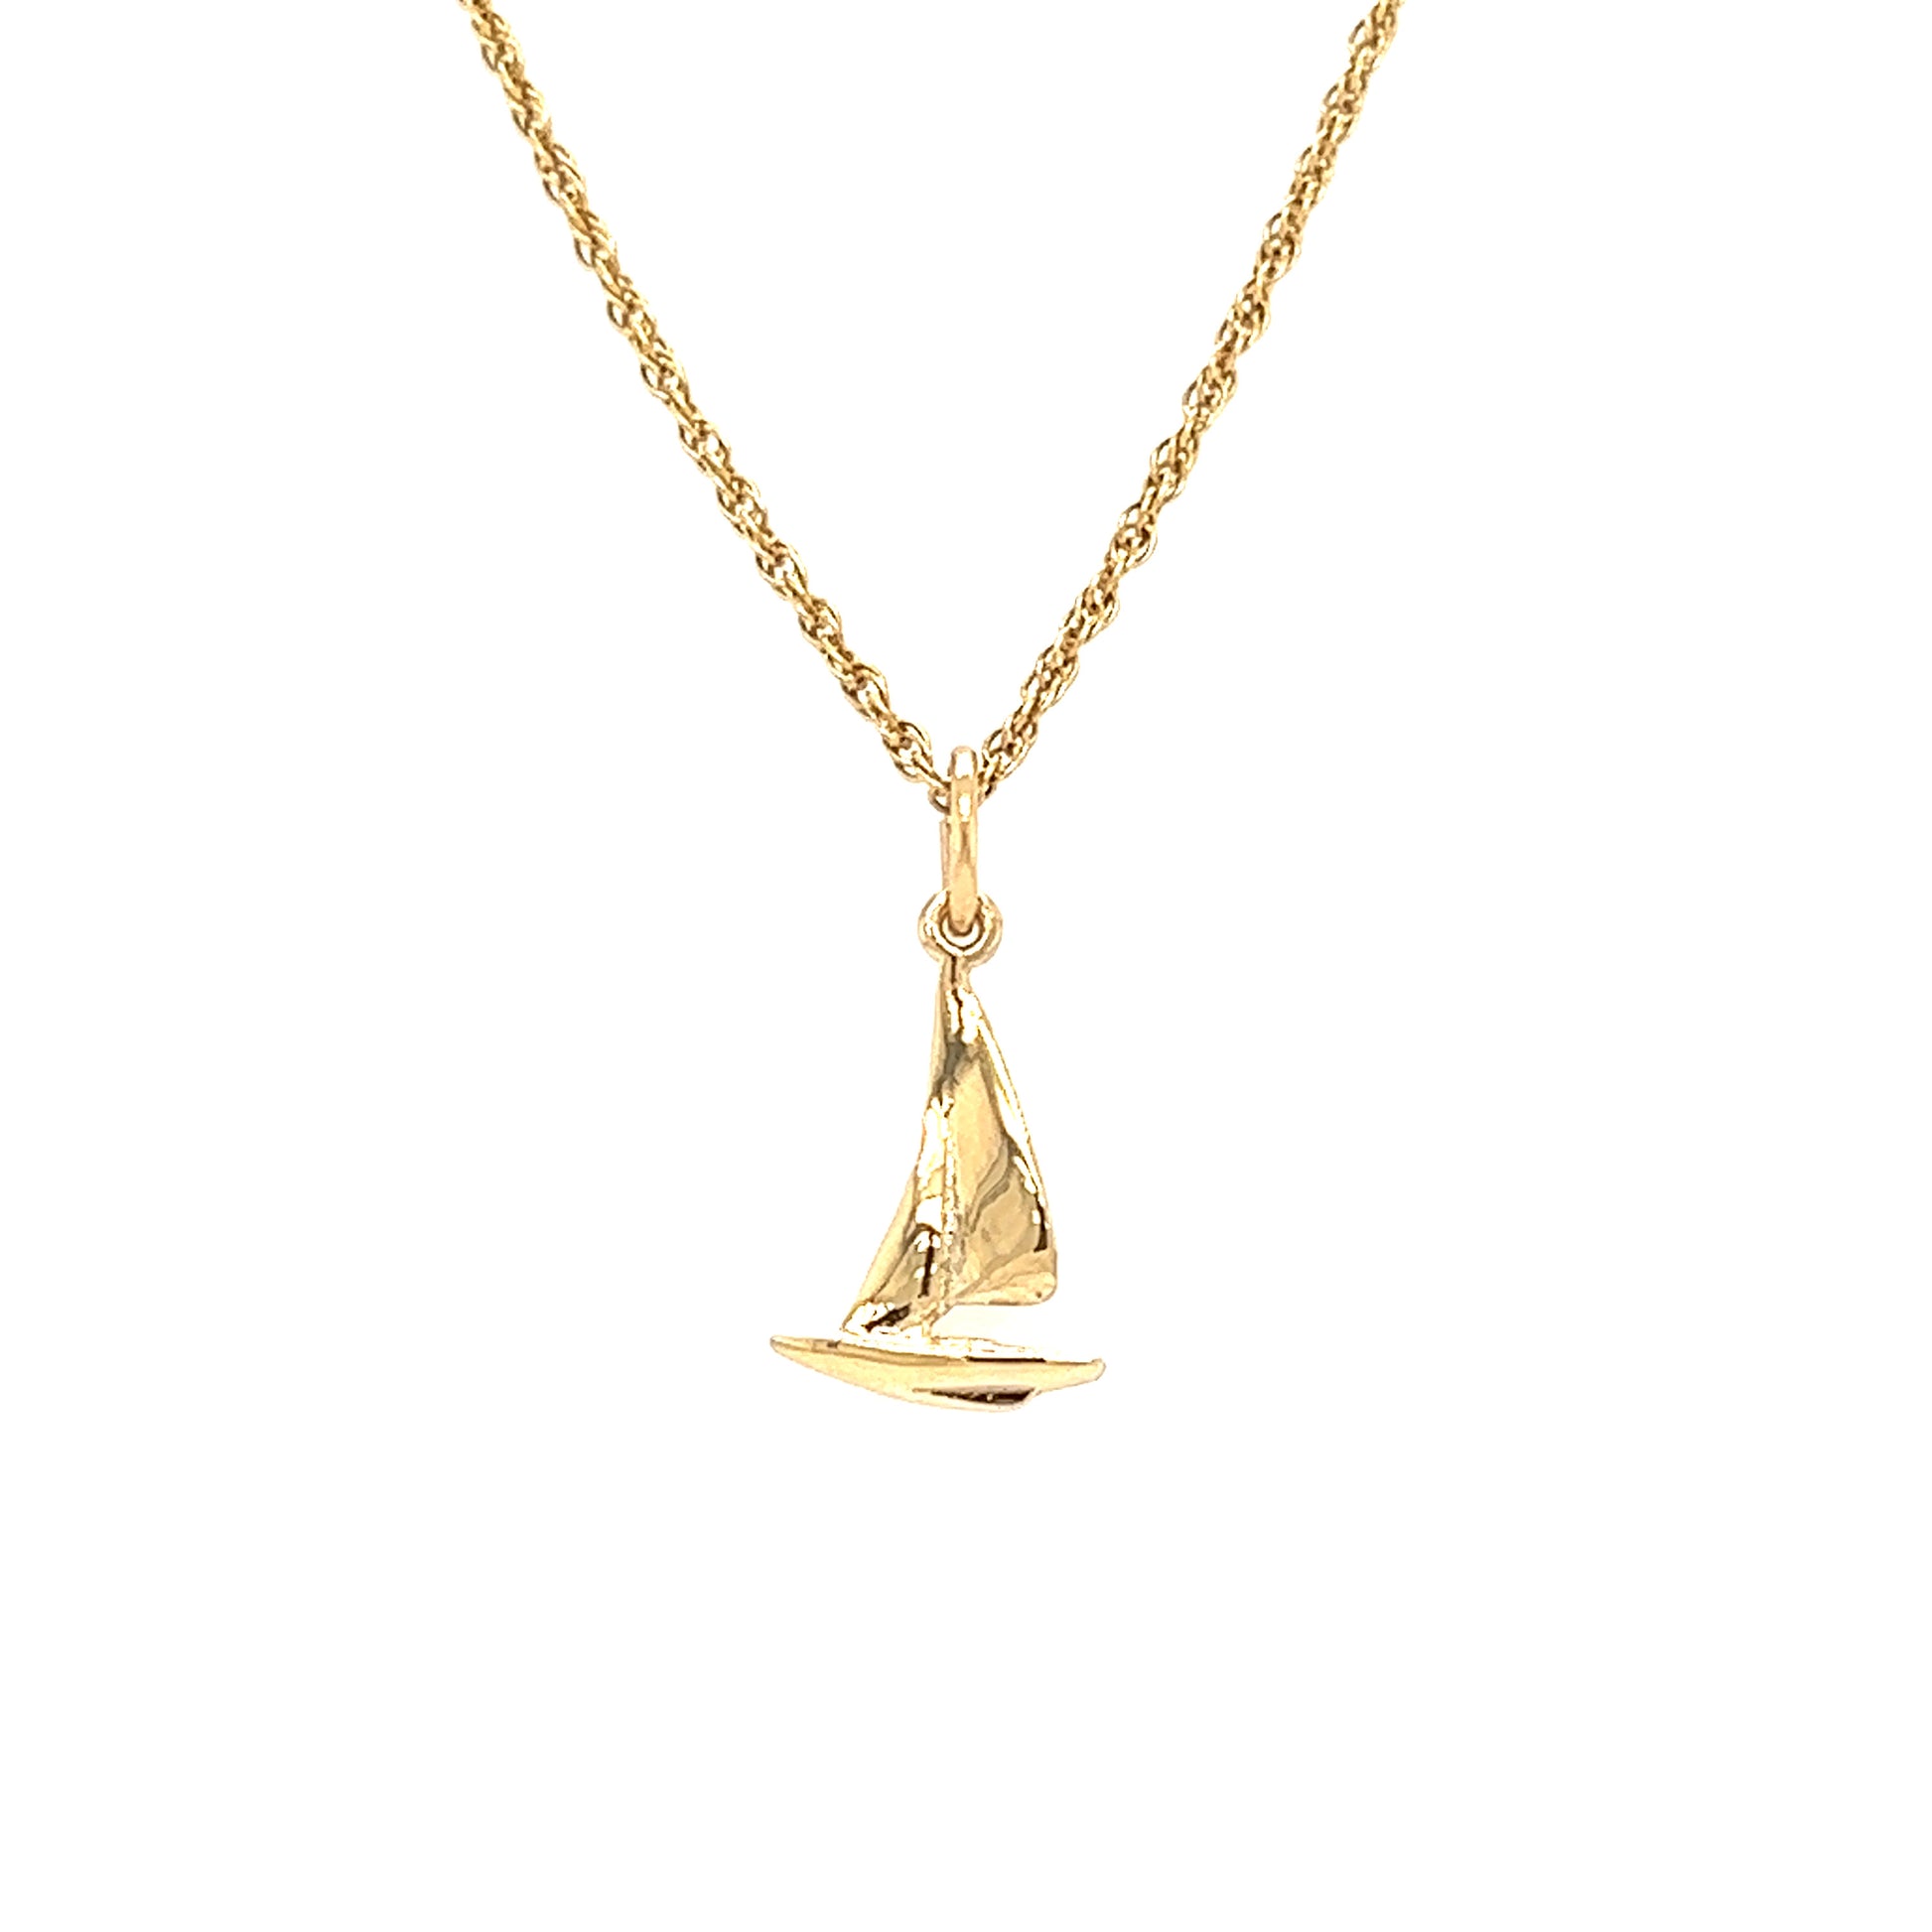 Small Sailboat Charm in 10K Yellow Gold. Charm in a Chain Front View